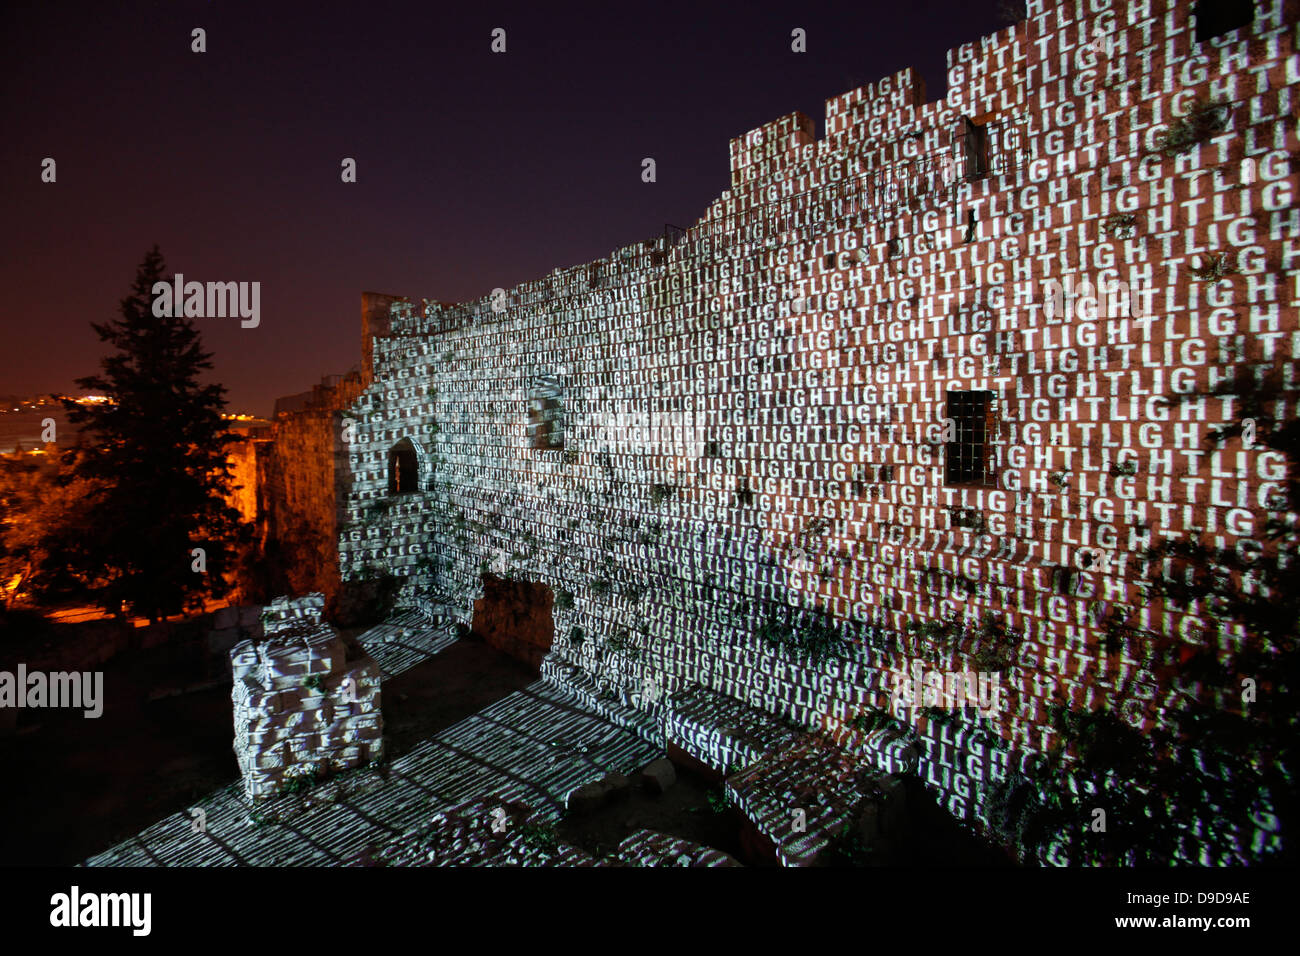 The word Light in English is projected onto old city walls during the Jerusalem Festival of Light in Israel which takes place annually around the old city with special effects illuminating historical sites and displays the work of leading international artists. Stock Photo